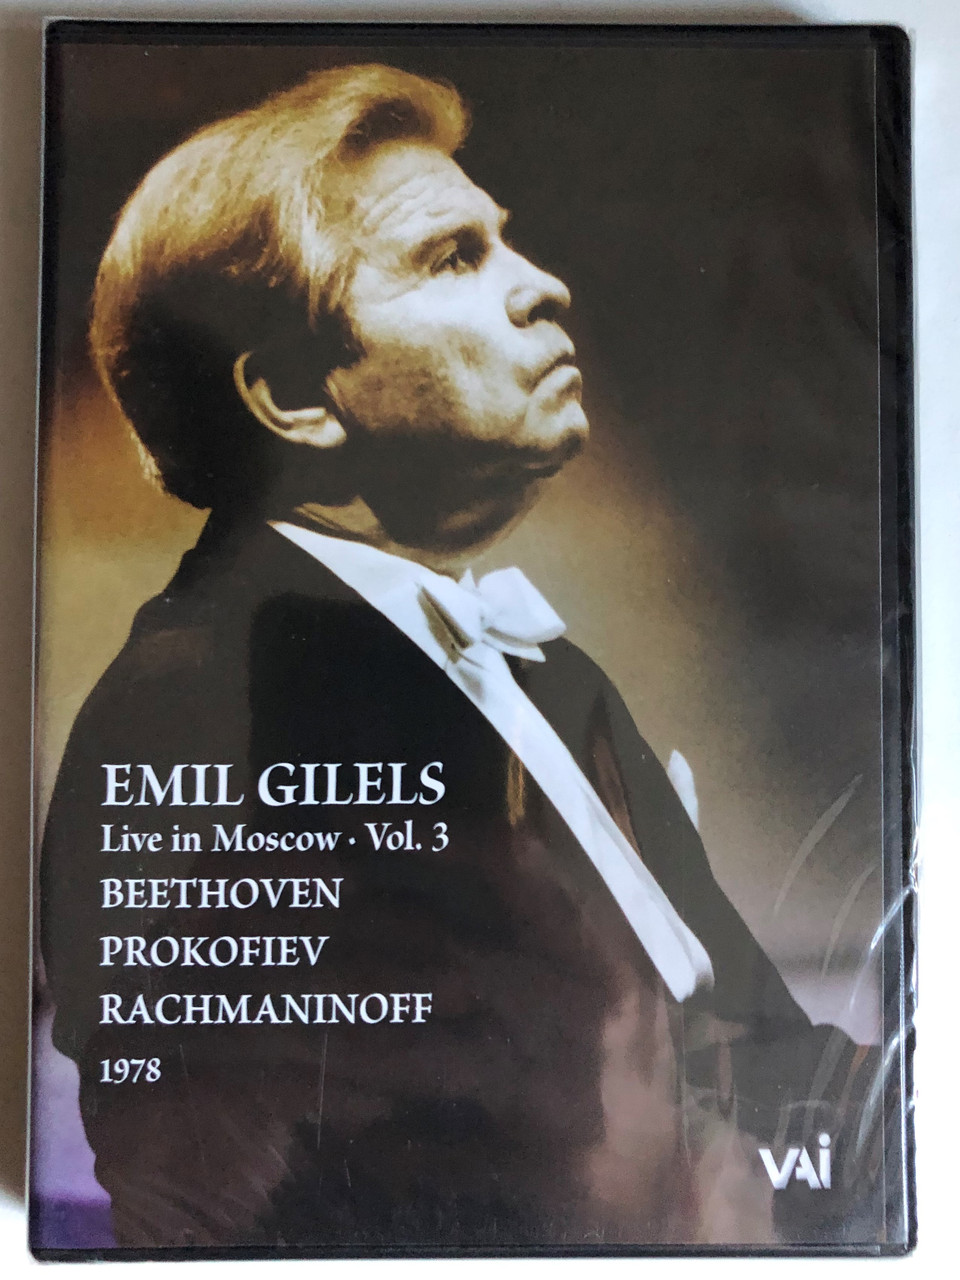 Emil_Gilels_Live_in_Moscow_Vol_3_Emil_Gilels_piano_Live_performance_1979_Great_Hall_of_the_Moscow_Conservatory_Packaging_design_and_DVD_authoring_2008_Video_Artists_Inte__59990.1691896488.1280.1280.JPG (960×1280)